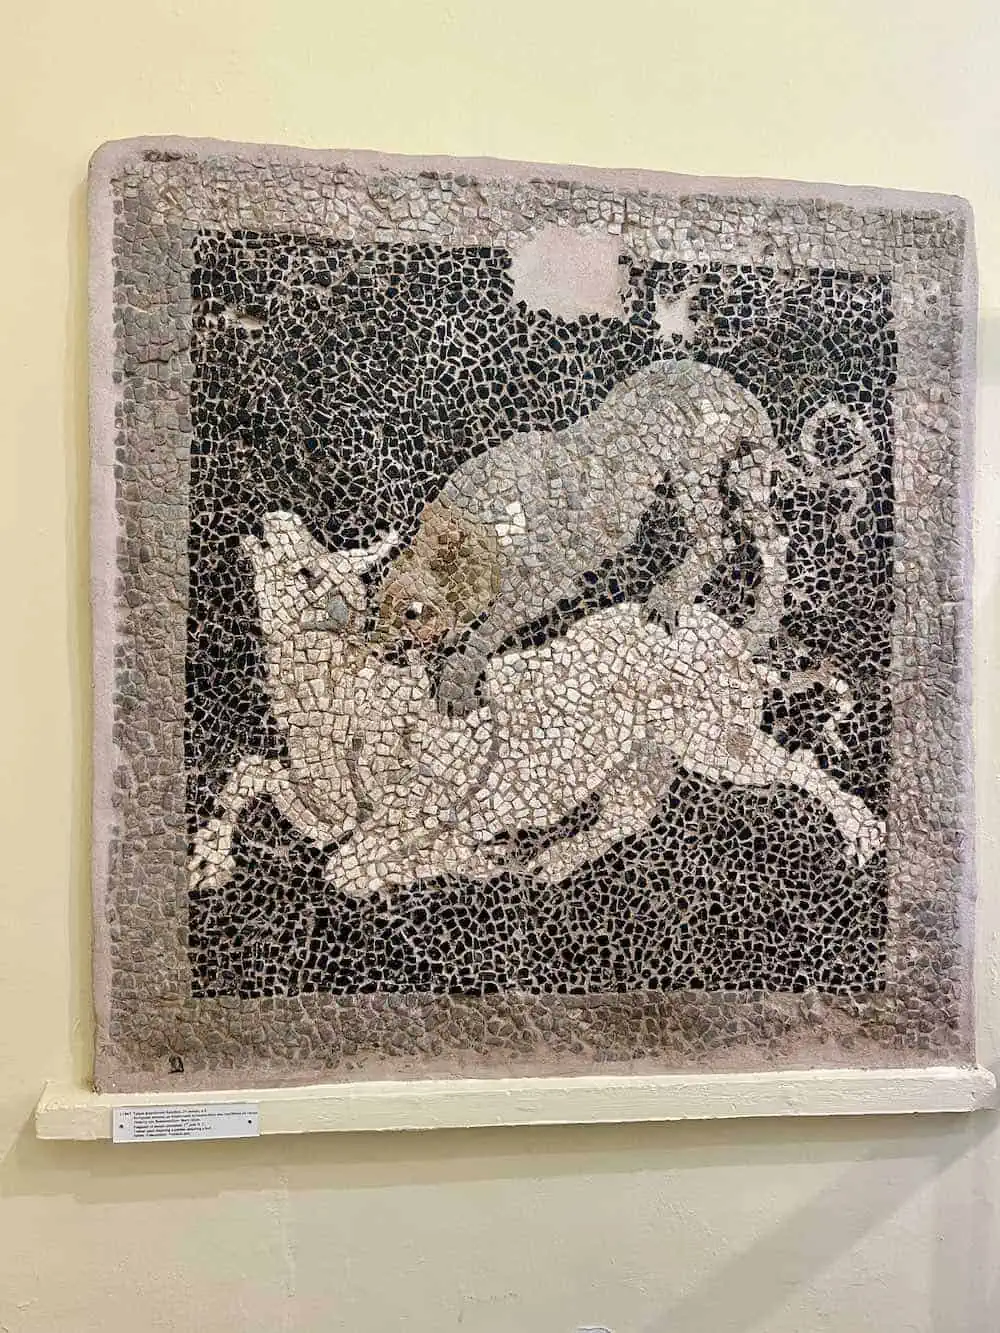 Fragment of a mosaic depicting a panther attacking a bull from 2nd century BC in the Archeology Museum of Sparta. (Credit: Francisco Sanchez)